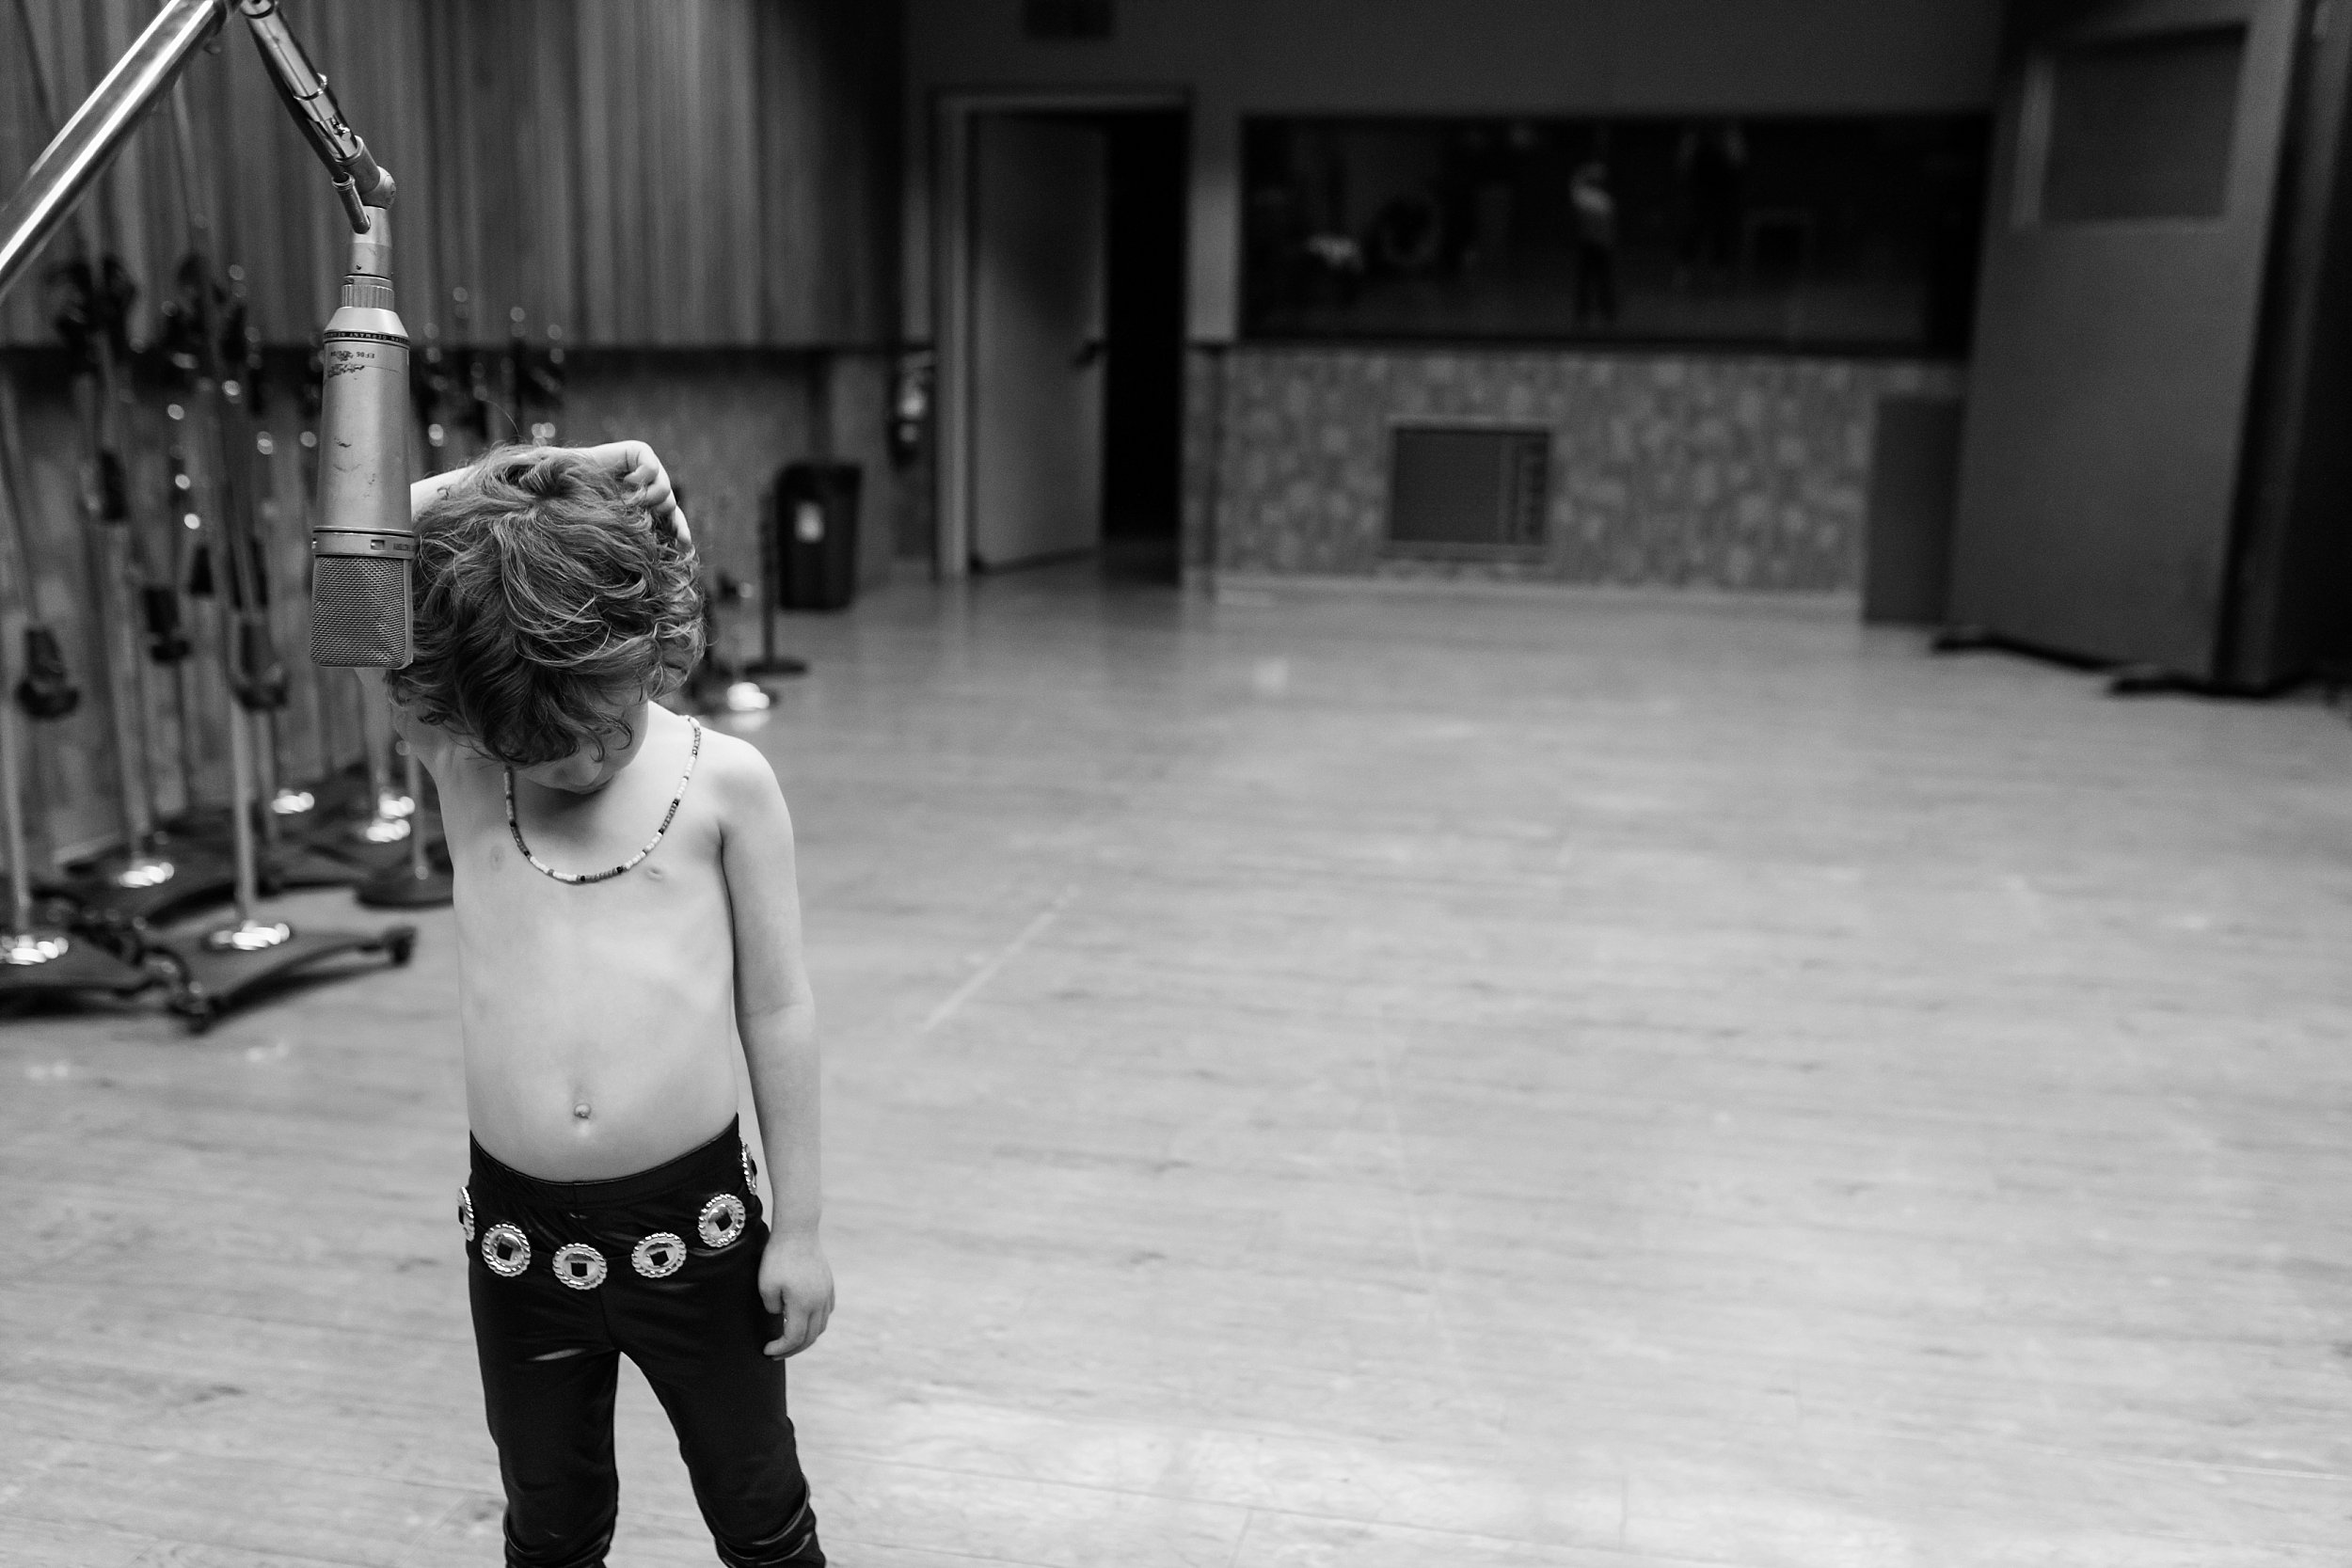 5 year old recording music at Sunset Studios as Jim Morrison from The Doors by A Pocket of Time Photography